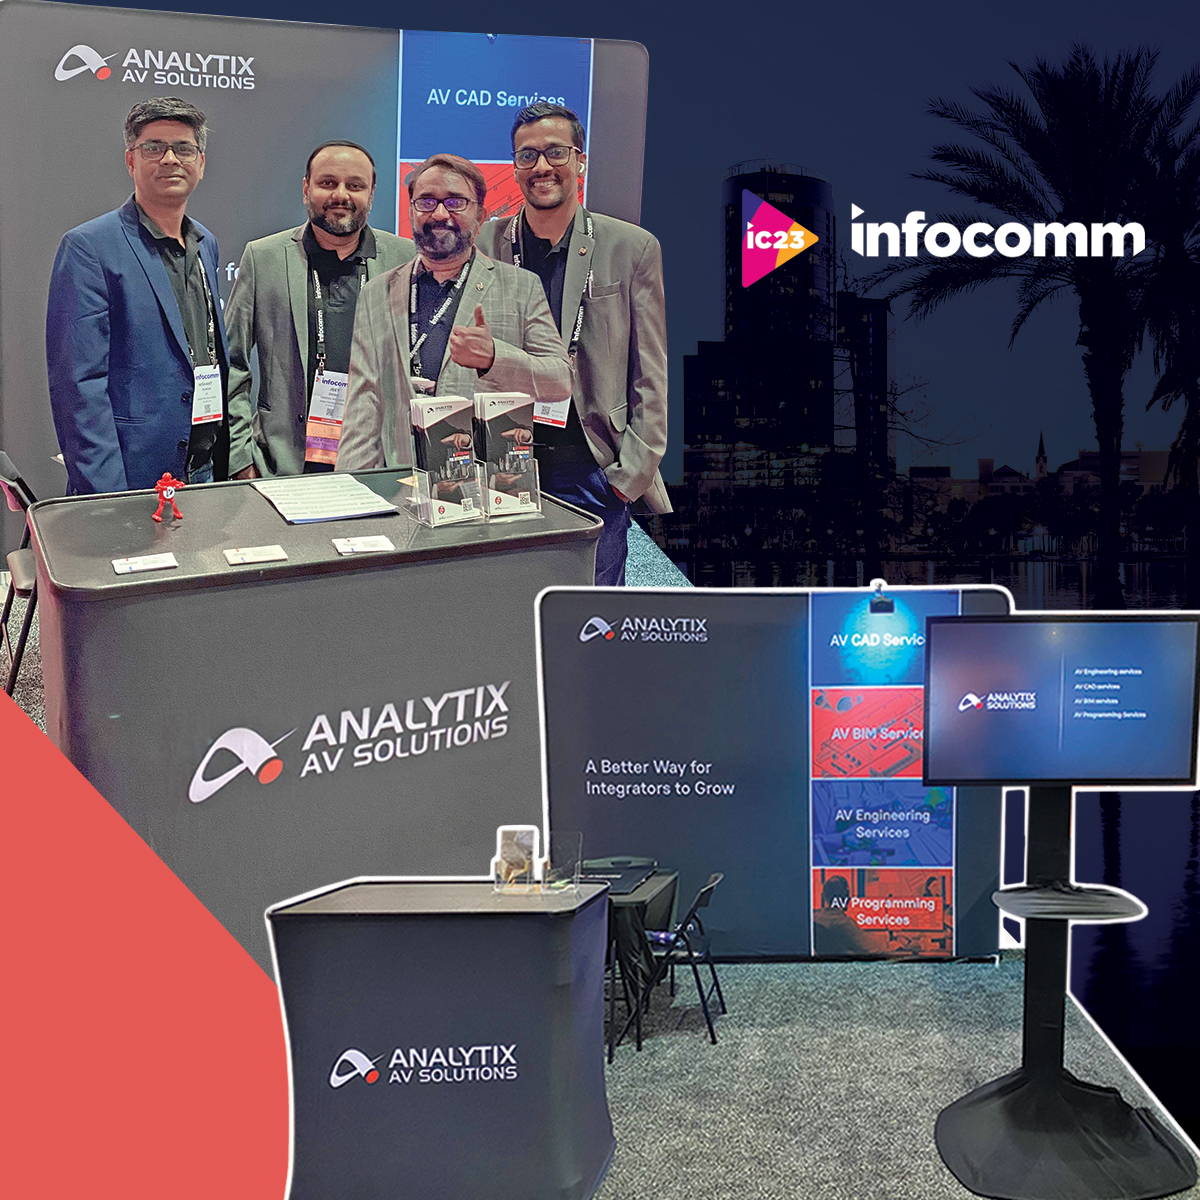 Thank you for visiting us at @InfoComm 2023. It was a pleasure showcasing our AV services and discussing how we can improve your audiovisual experiences. To learn more about our offerings, connect with us today! #analytixsolutions #InfoComm #AVsolutions #AVtech #infocomm2023